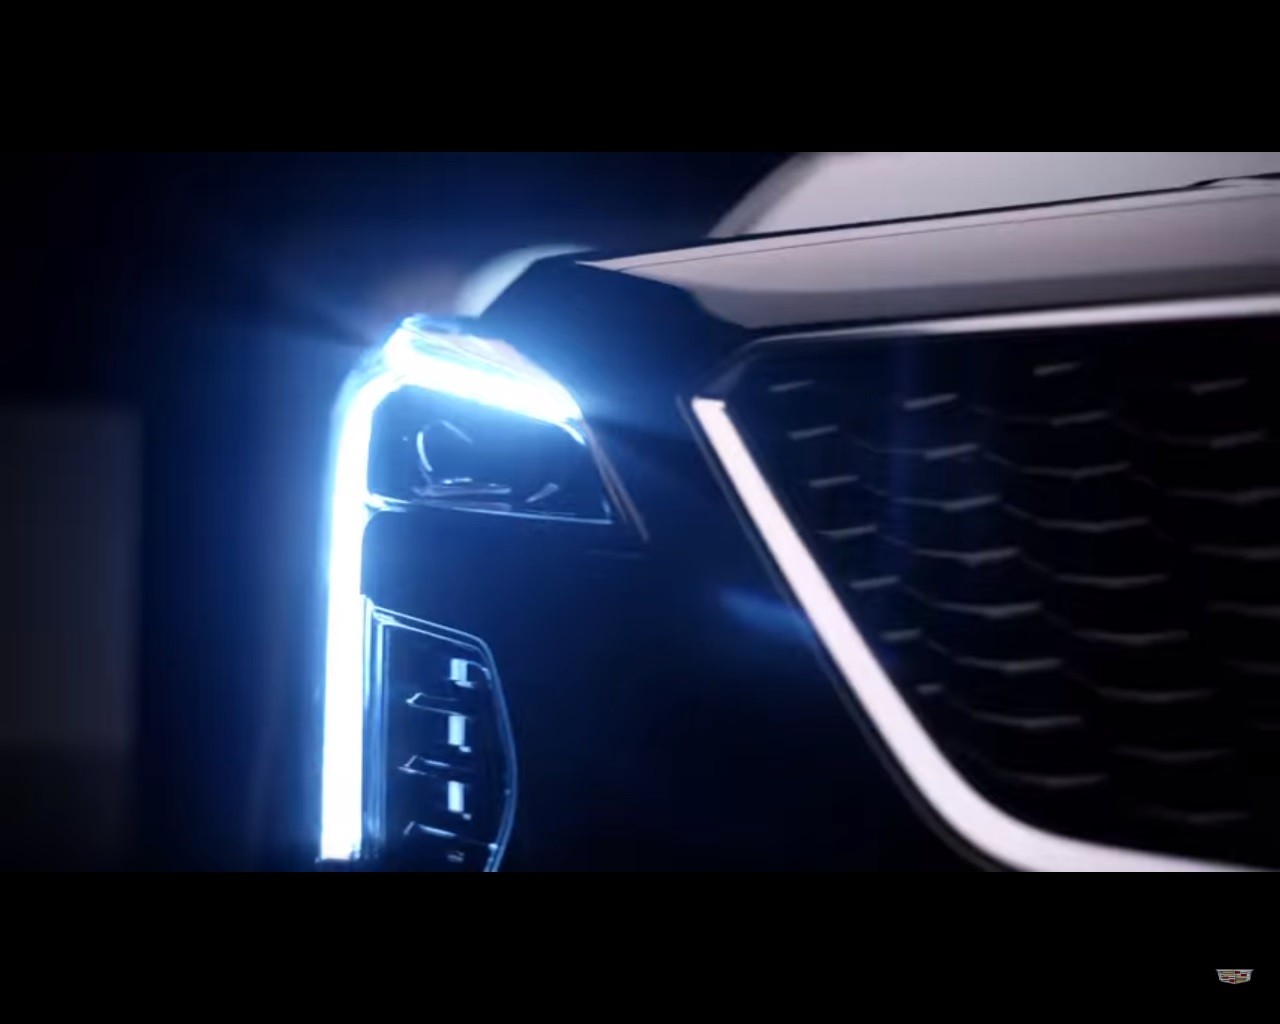 2019 Cadillac XT4 Teased, Going On Sale This Fall ...